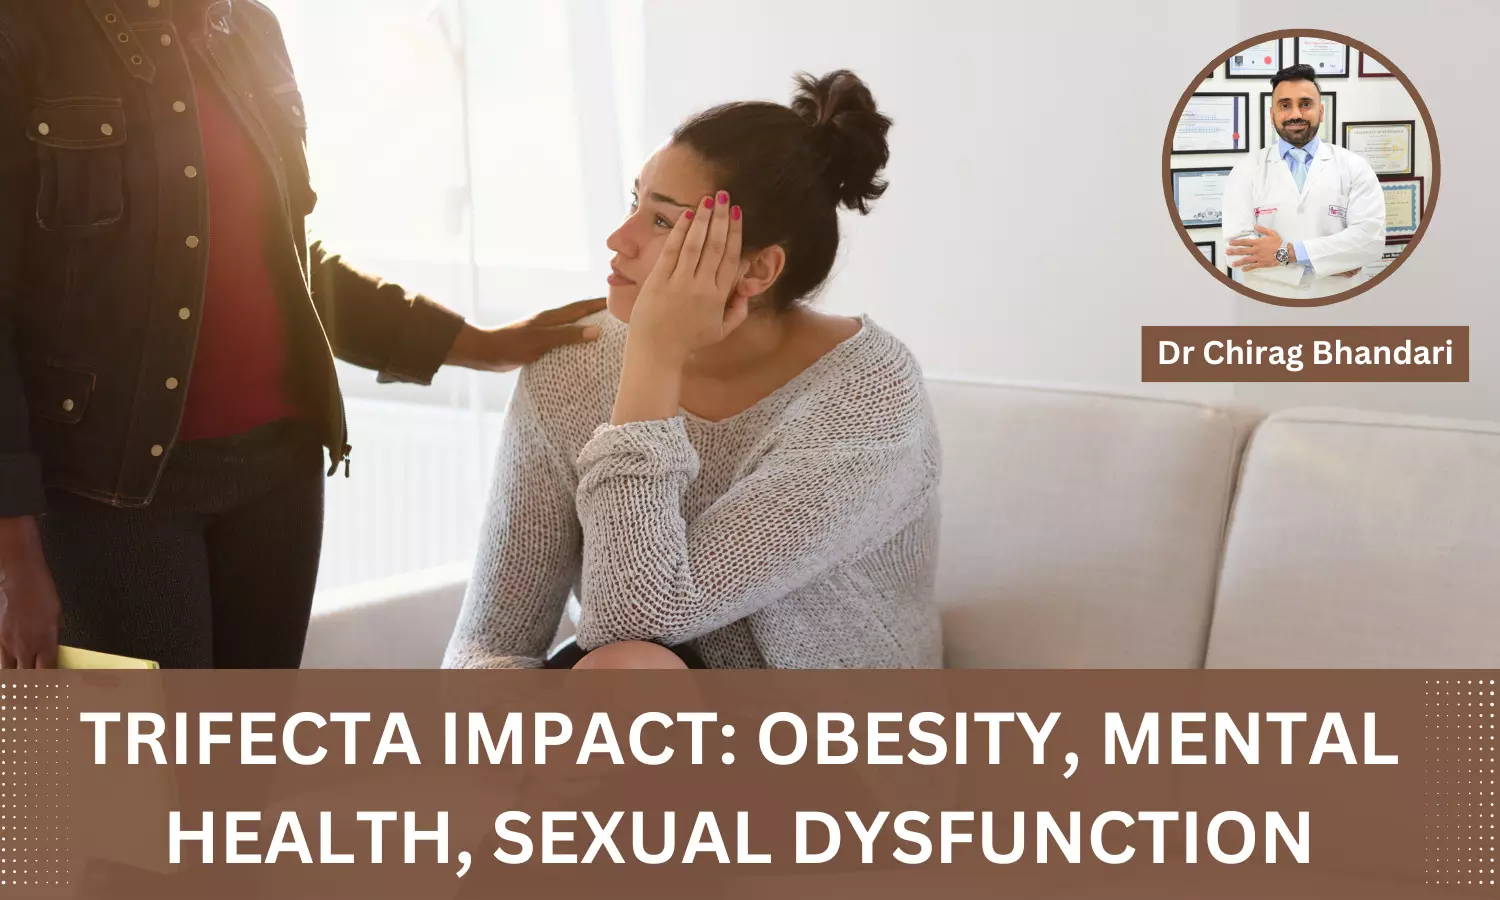 Breaking The Cycle: How Obesity, Mental Health, And Sexual Dysfunction Interact To Impact Quality Of Life - Dr Chirag Bhandari